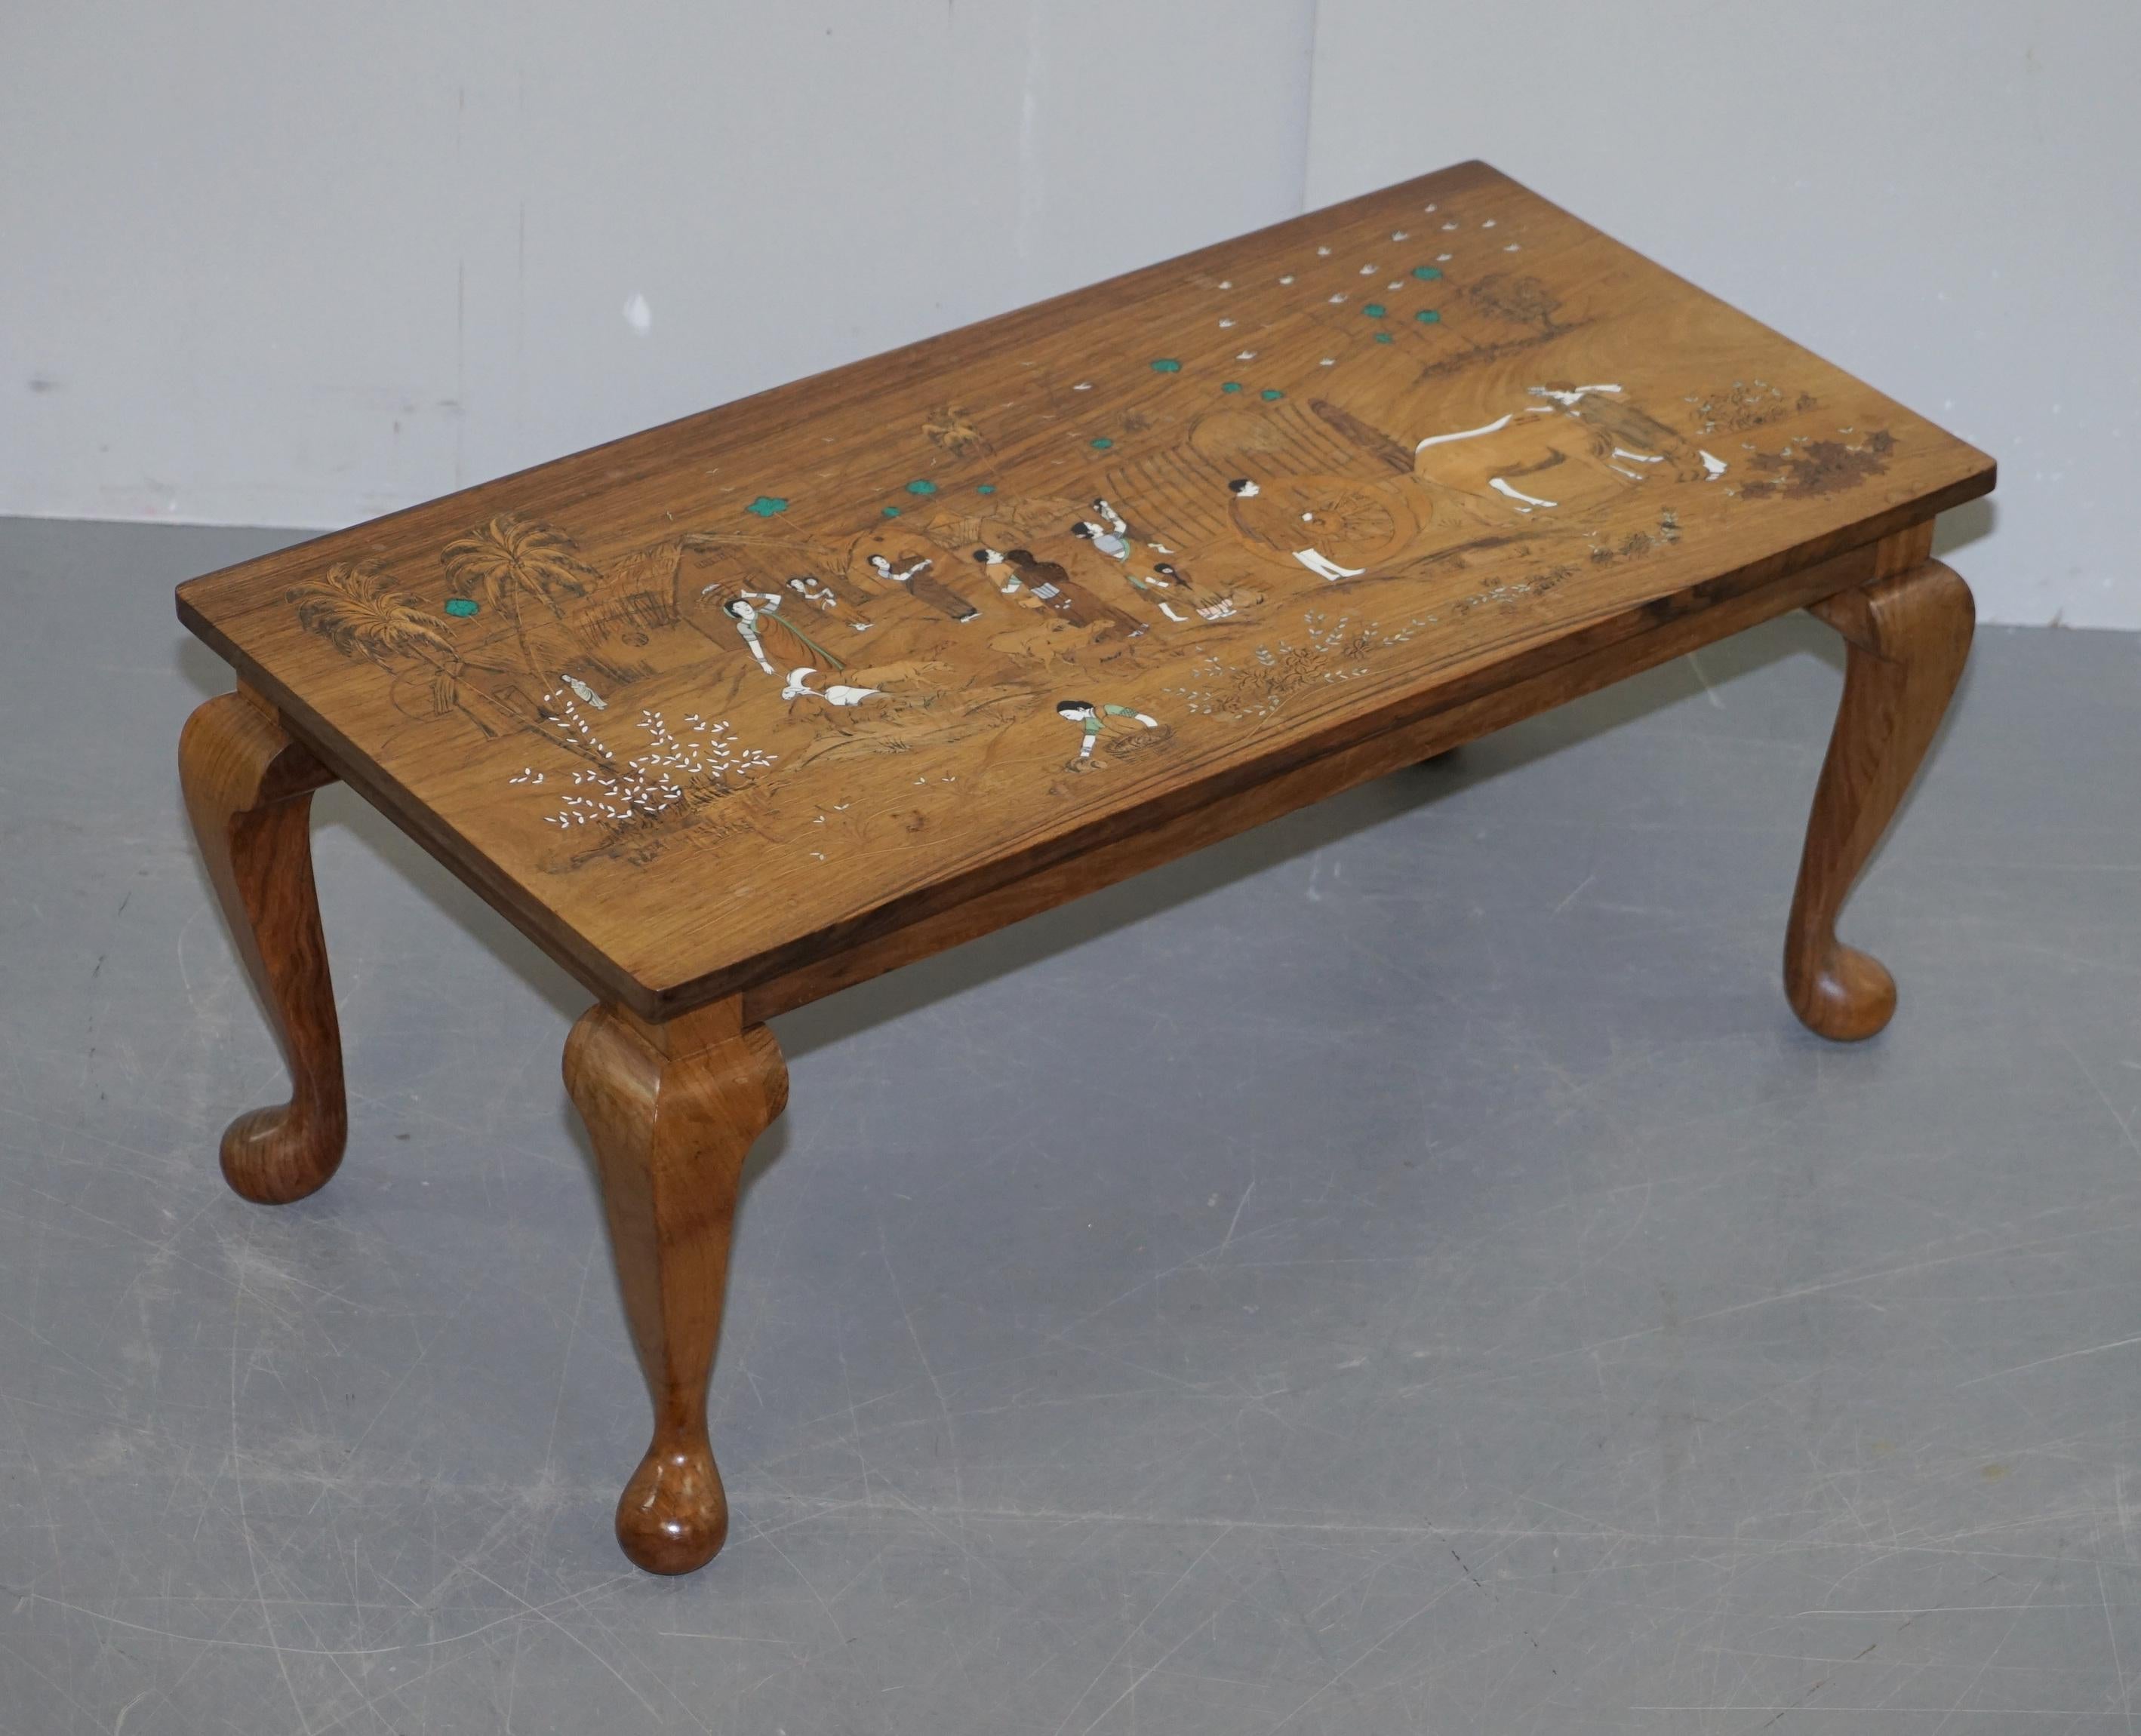 We are delighted to offer for sale this stunning antique Japanese Shibayyama inlaid coffee table depicting romantic lovers

This table is sublime, absolutely exquisite from every angle, circa 1900, hand made in Japan

It has been lightly